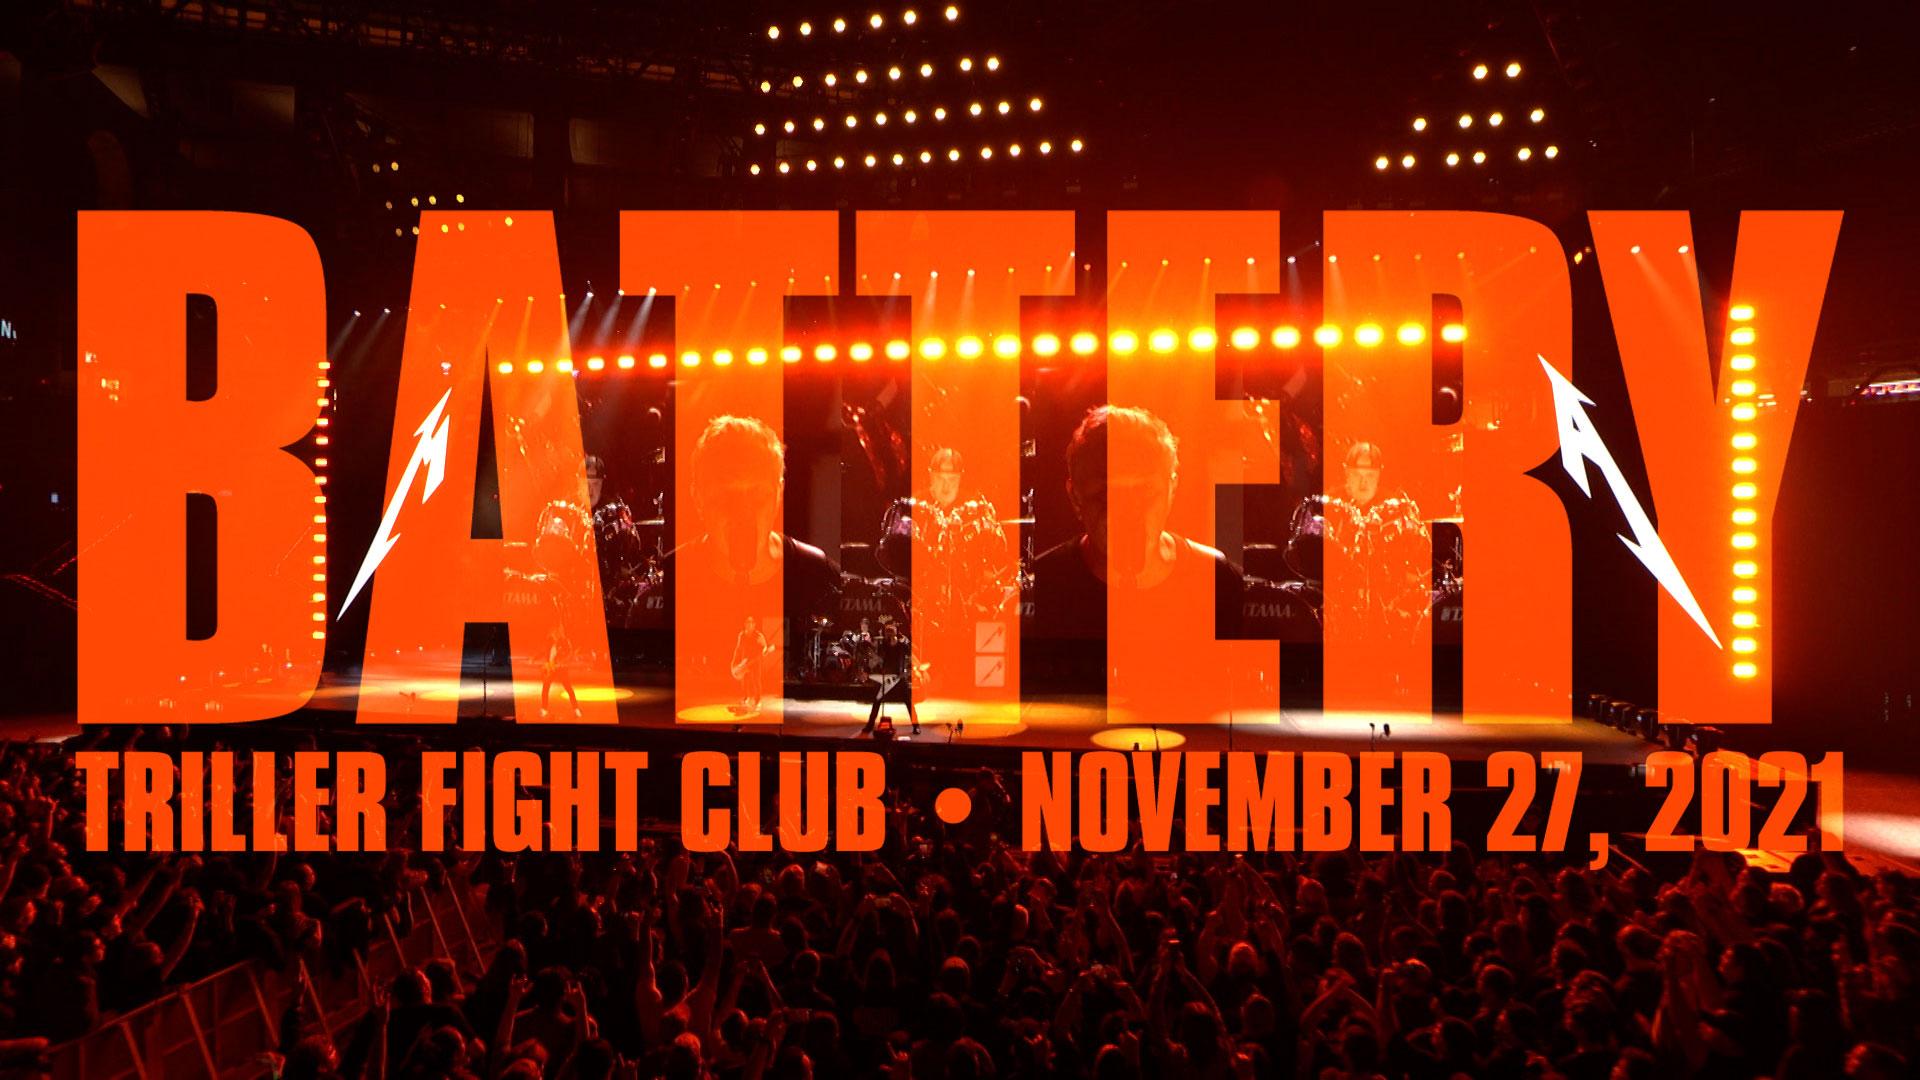 Watch Metallica perform "Battery" at Triller Fight Club at AT&T Stadium in Arlington, TX on November 27, 2021.